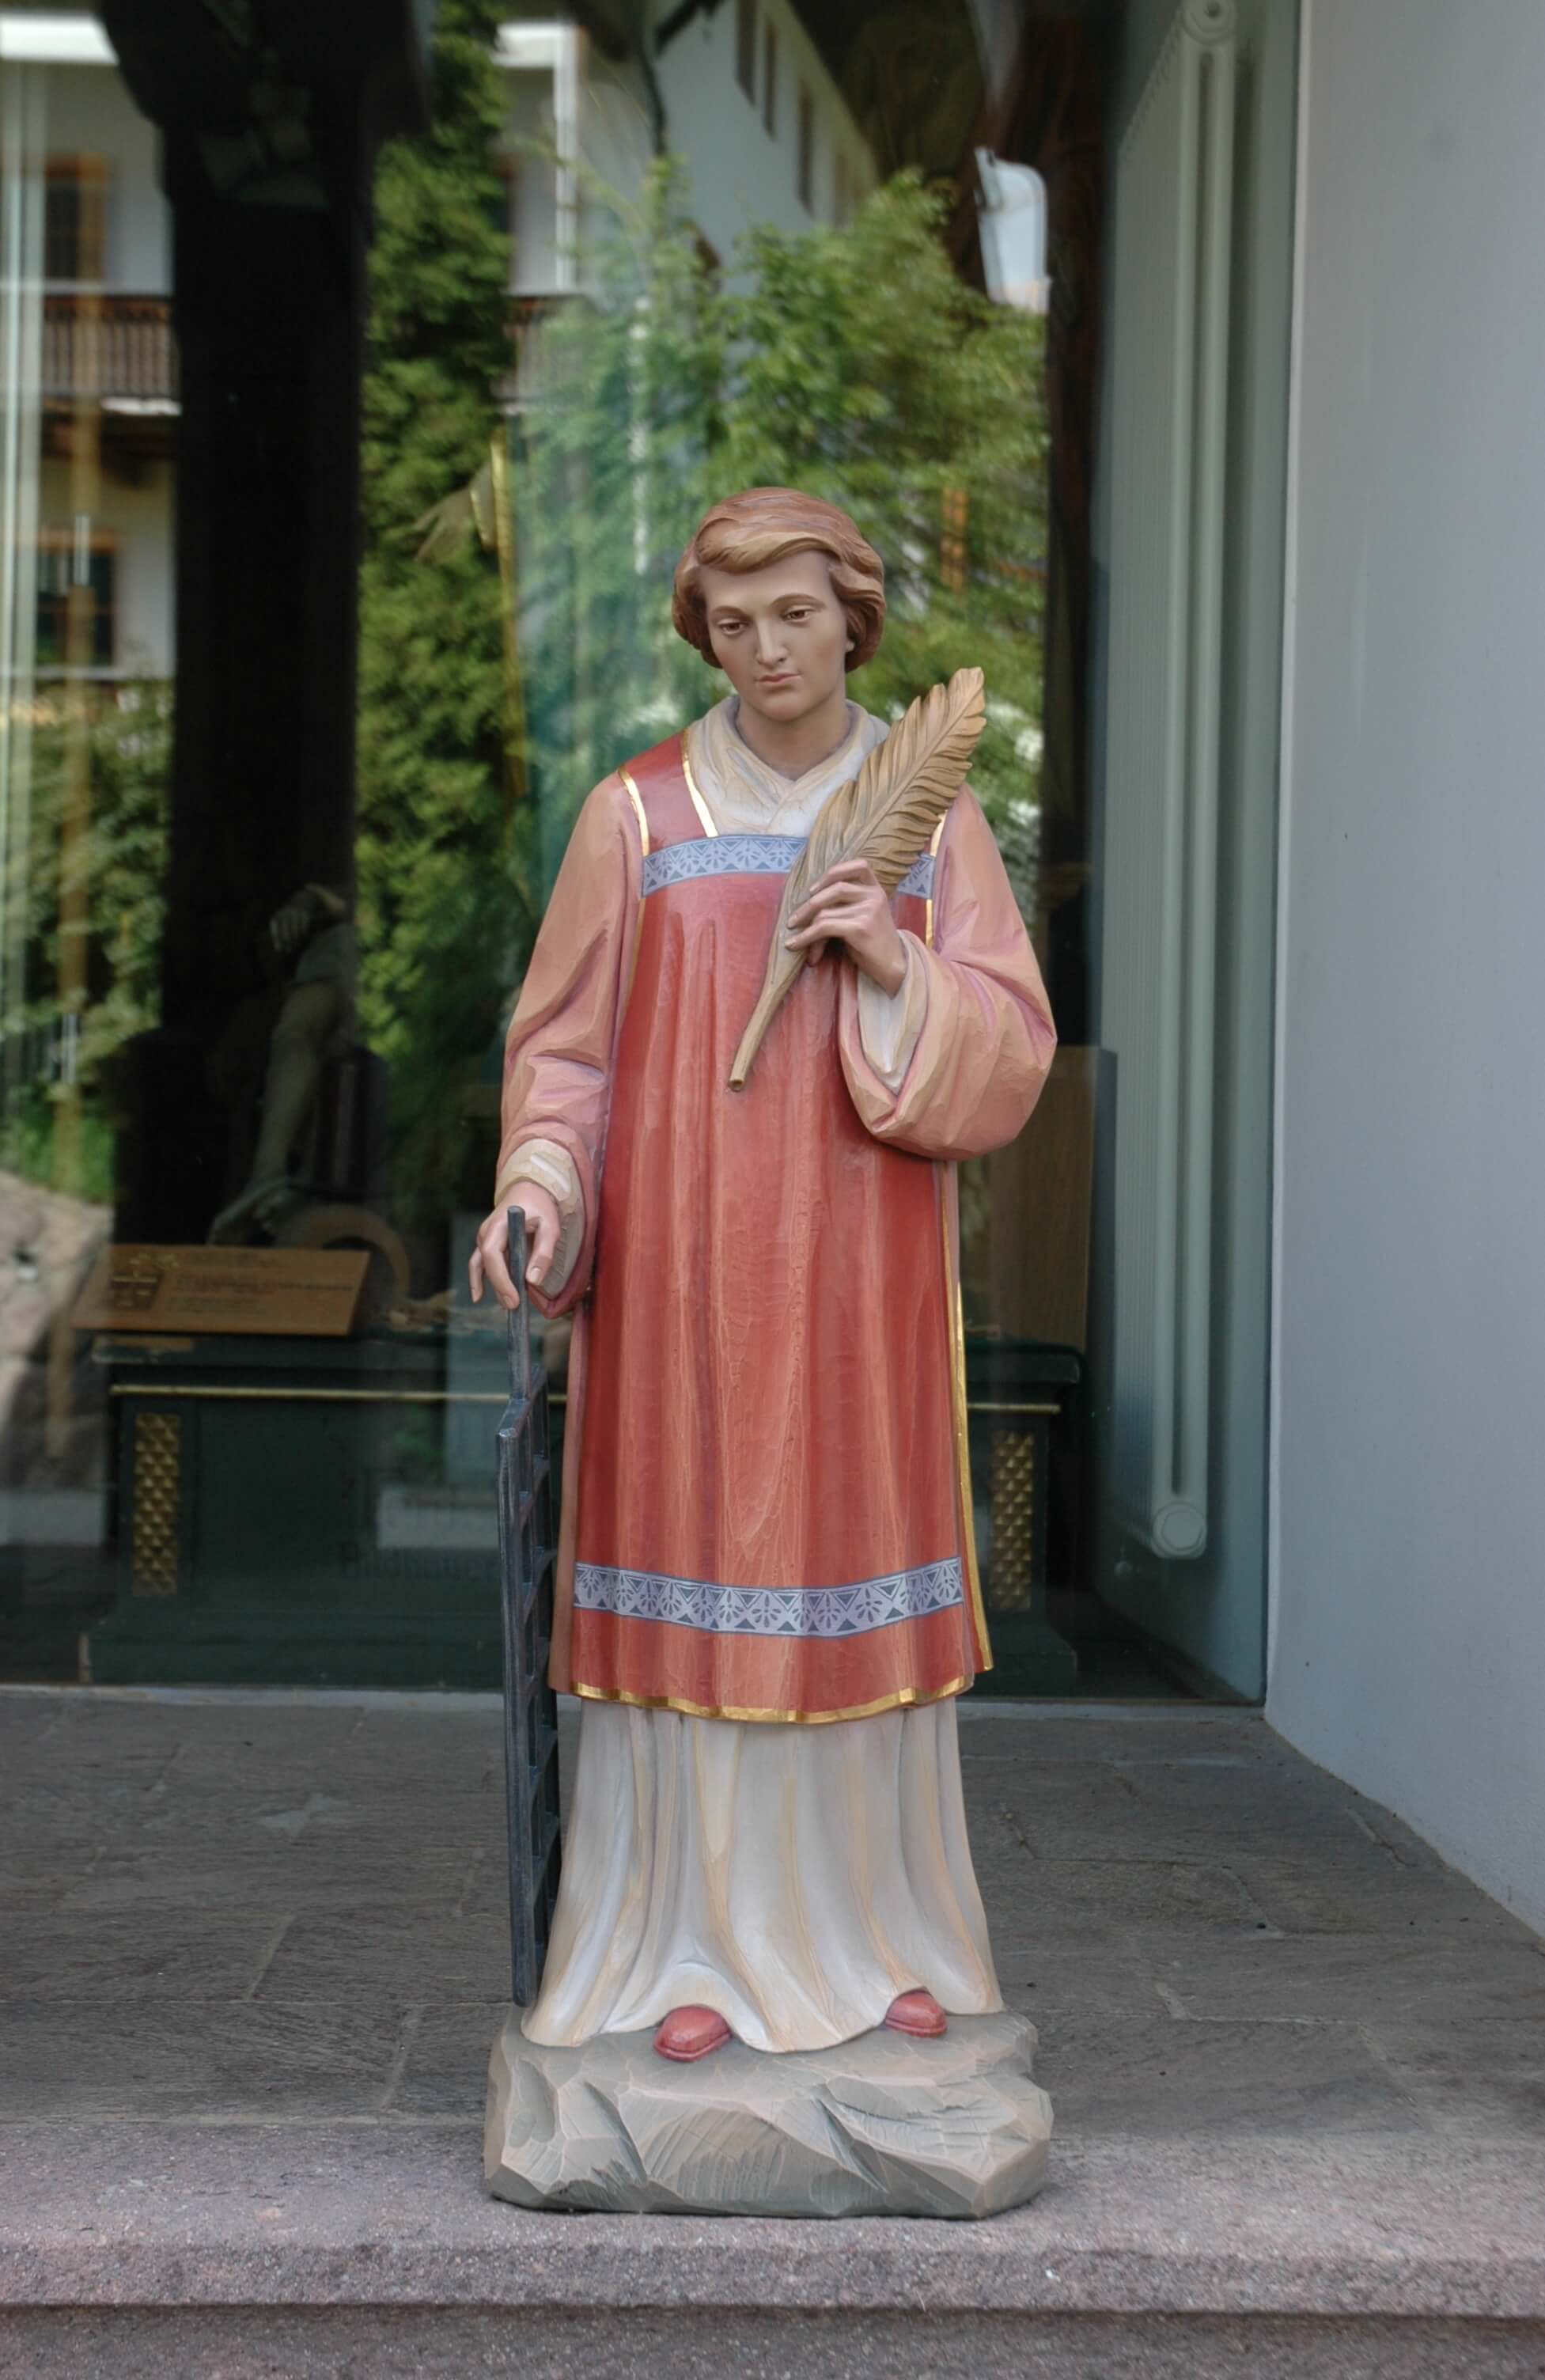 St Lawrence | Wood Carved Statue